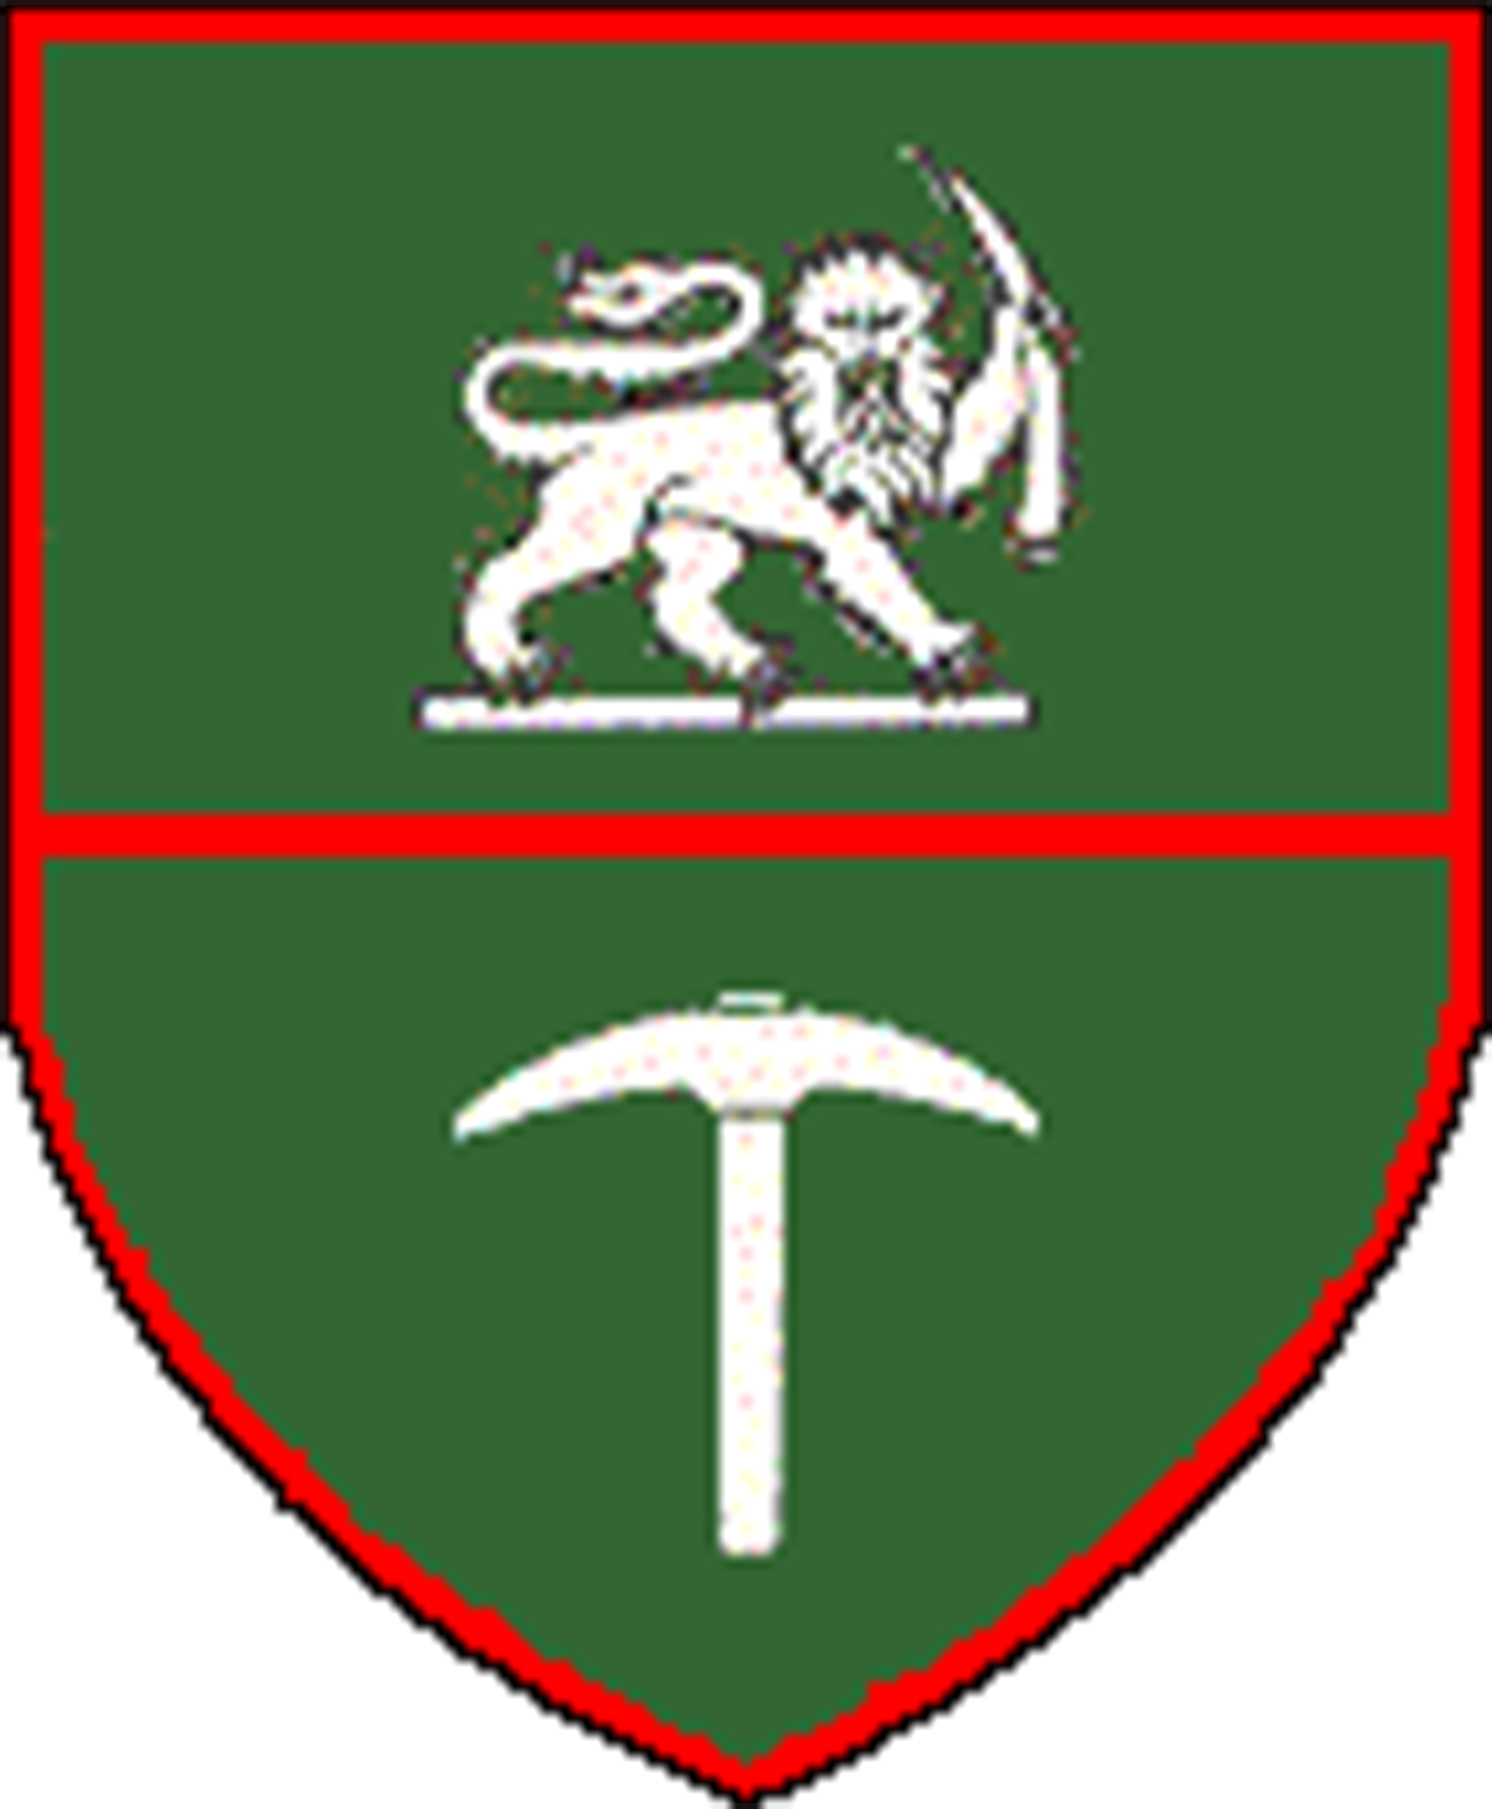 Rhodesian army crest which is the left side of the Rhodesian Army Association logo